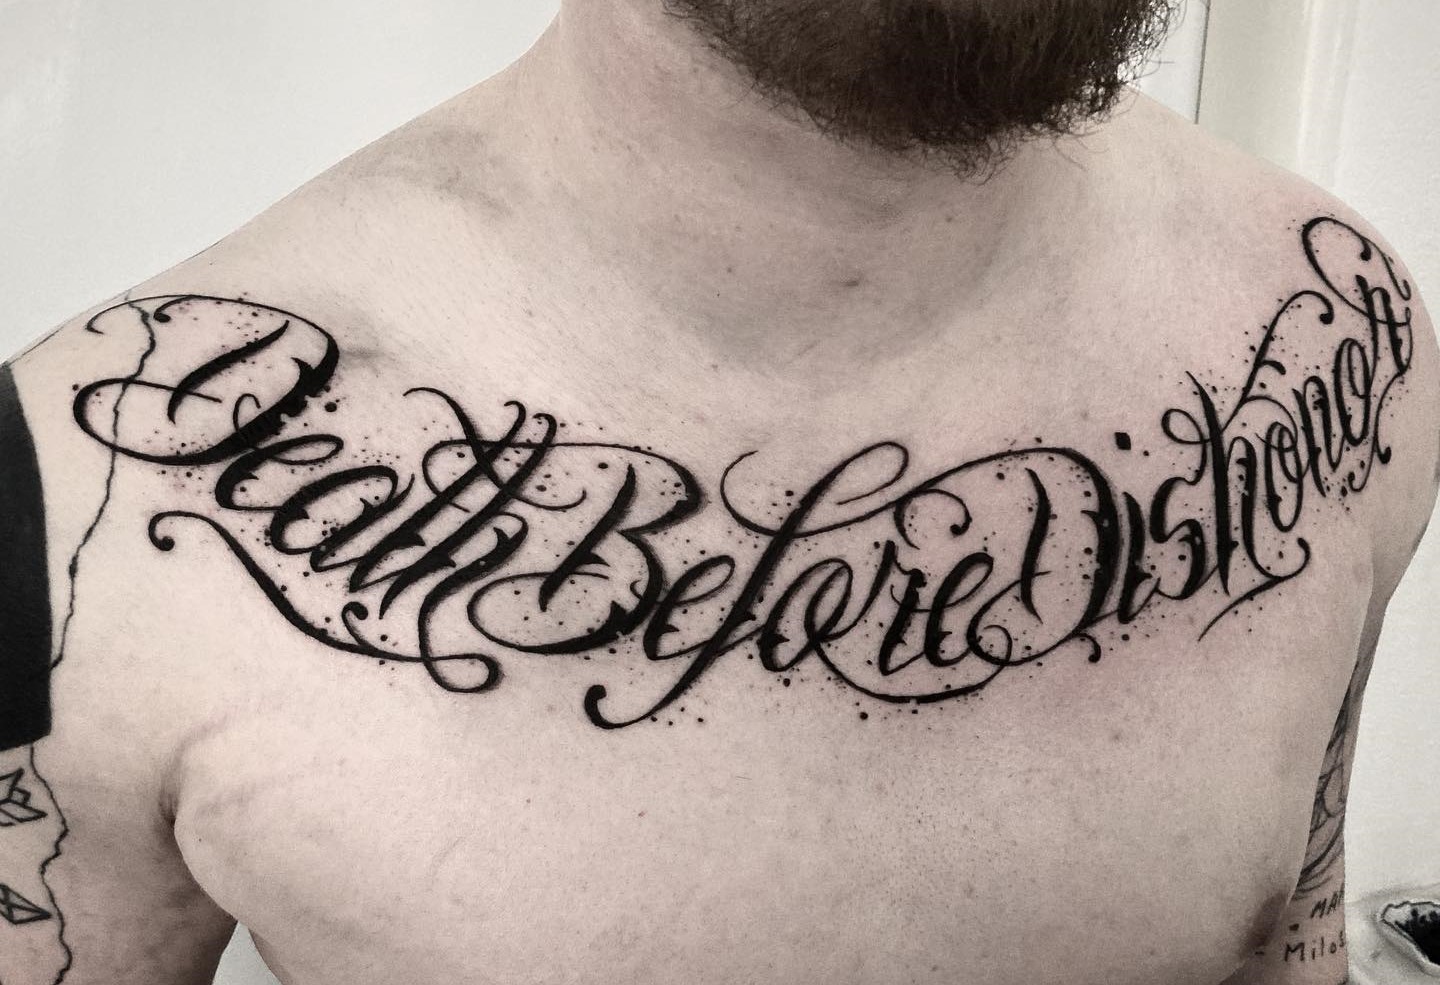 Death Before Dishonor Tattoo Designs You Need to See in 2023  alexie